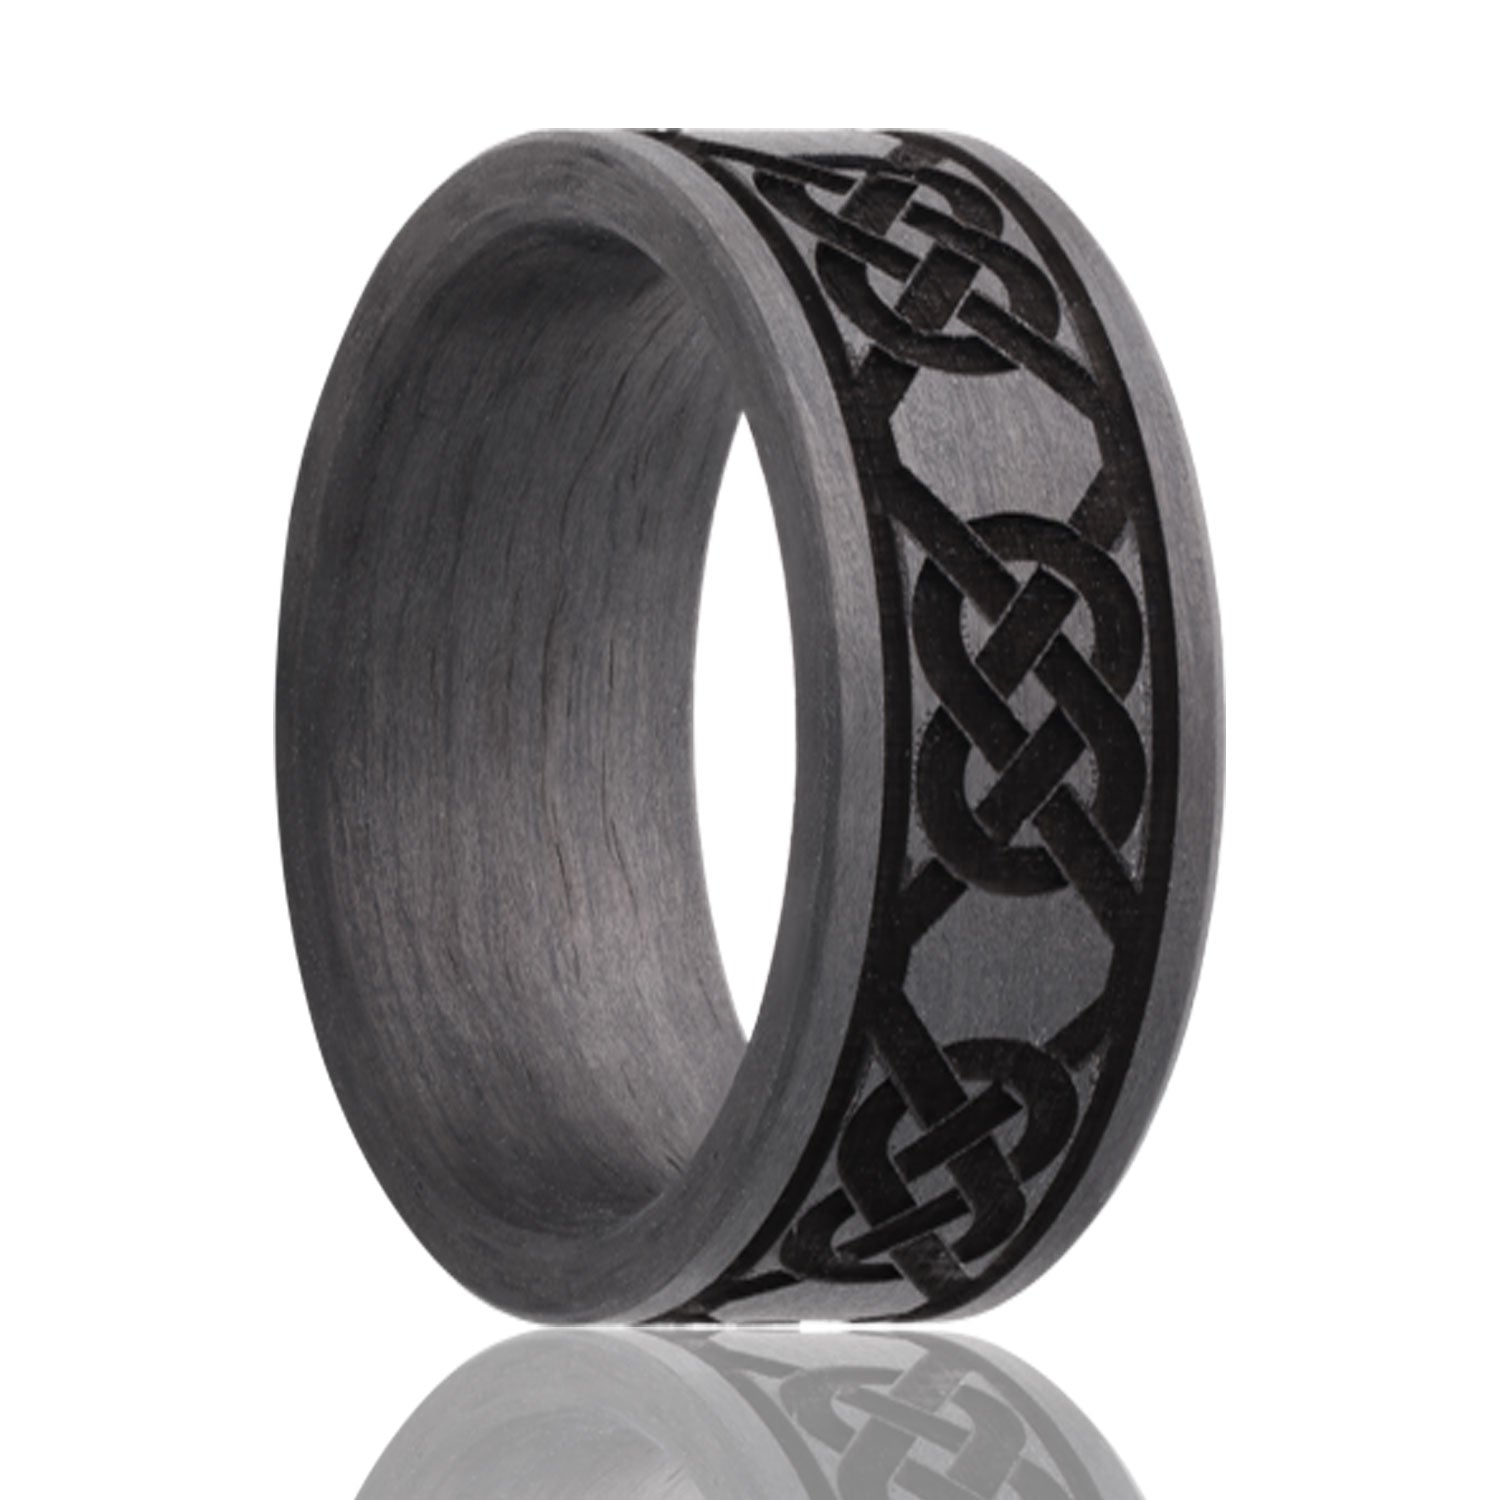 A celtic knot carbon fiber men's wedding band displayed on a neutral white background.